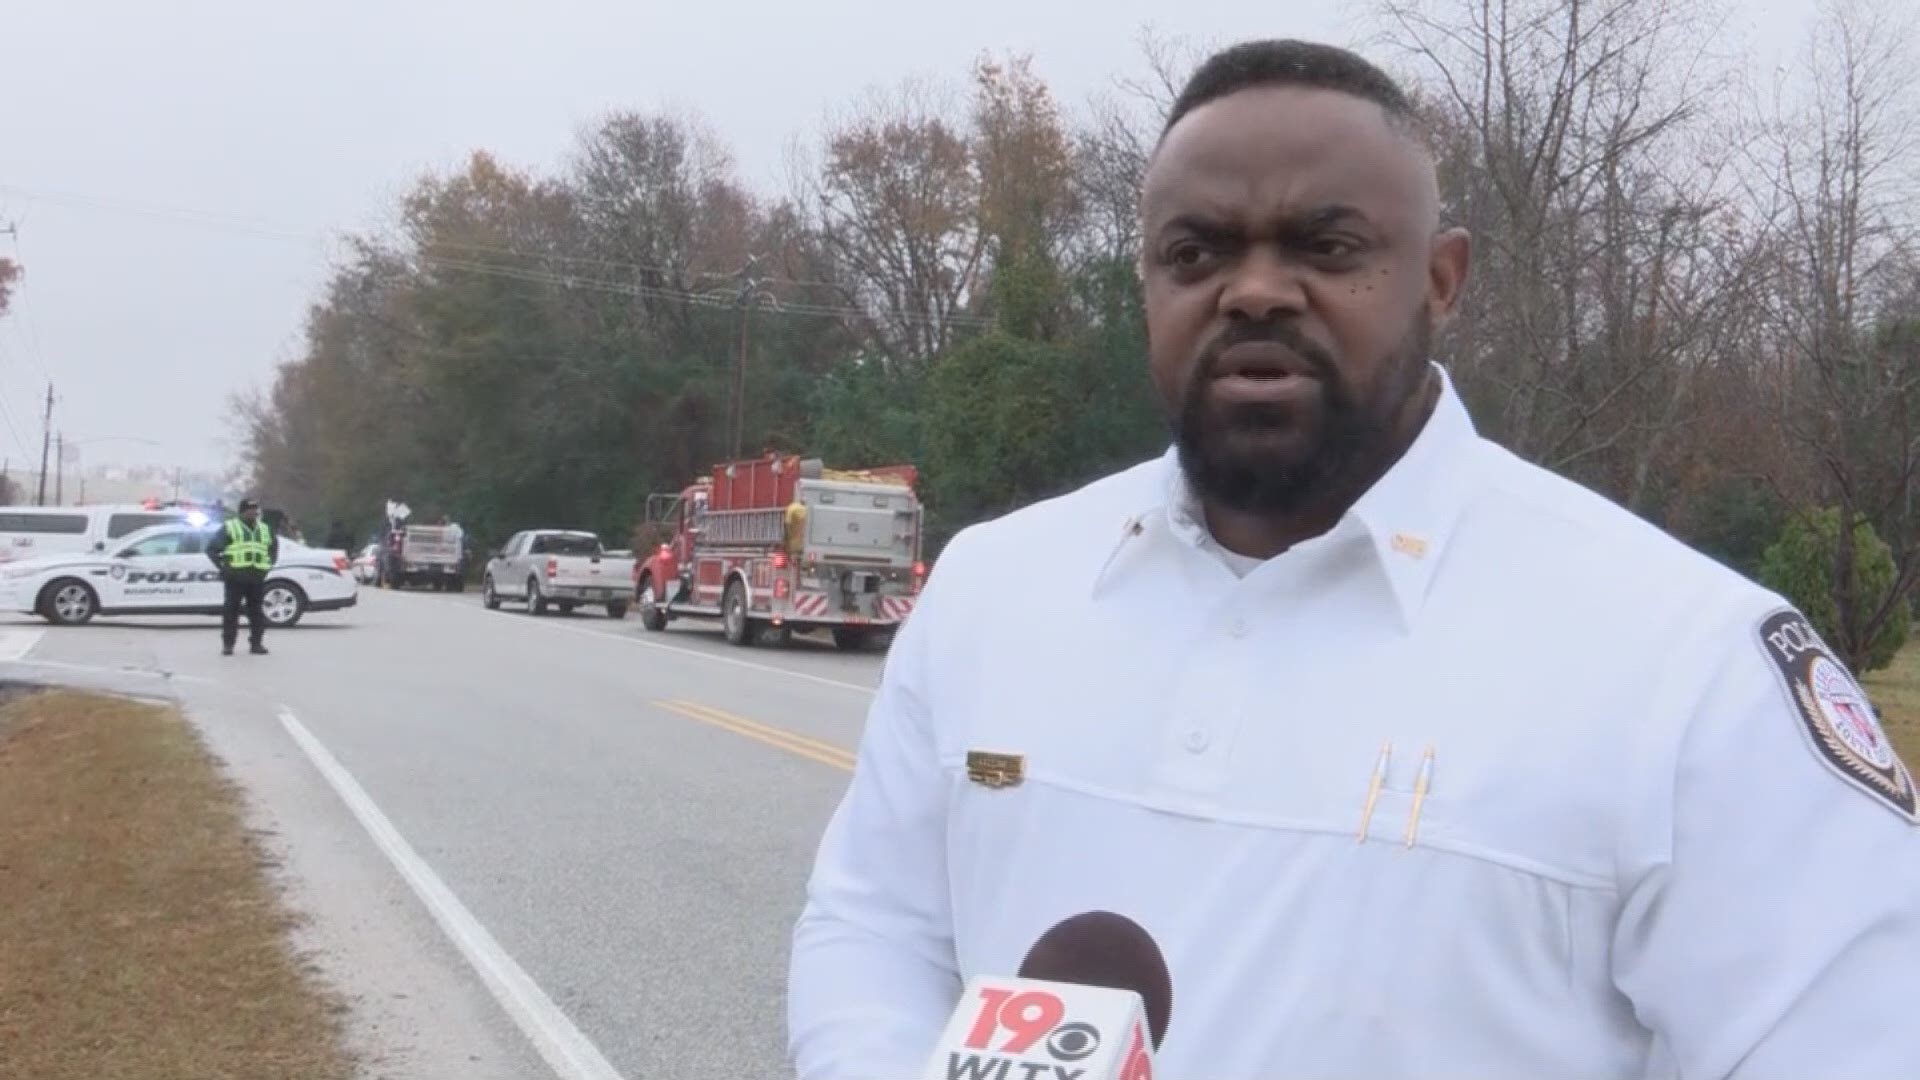 Bishopville police chief Calvin Collins describes the scene in Bishopville as crews respond to an incident outside the Coca Cola plant.